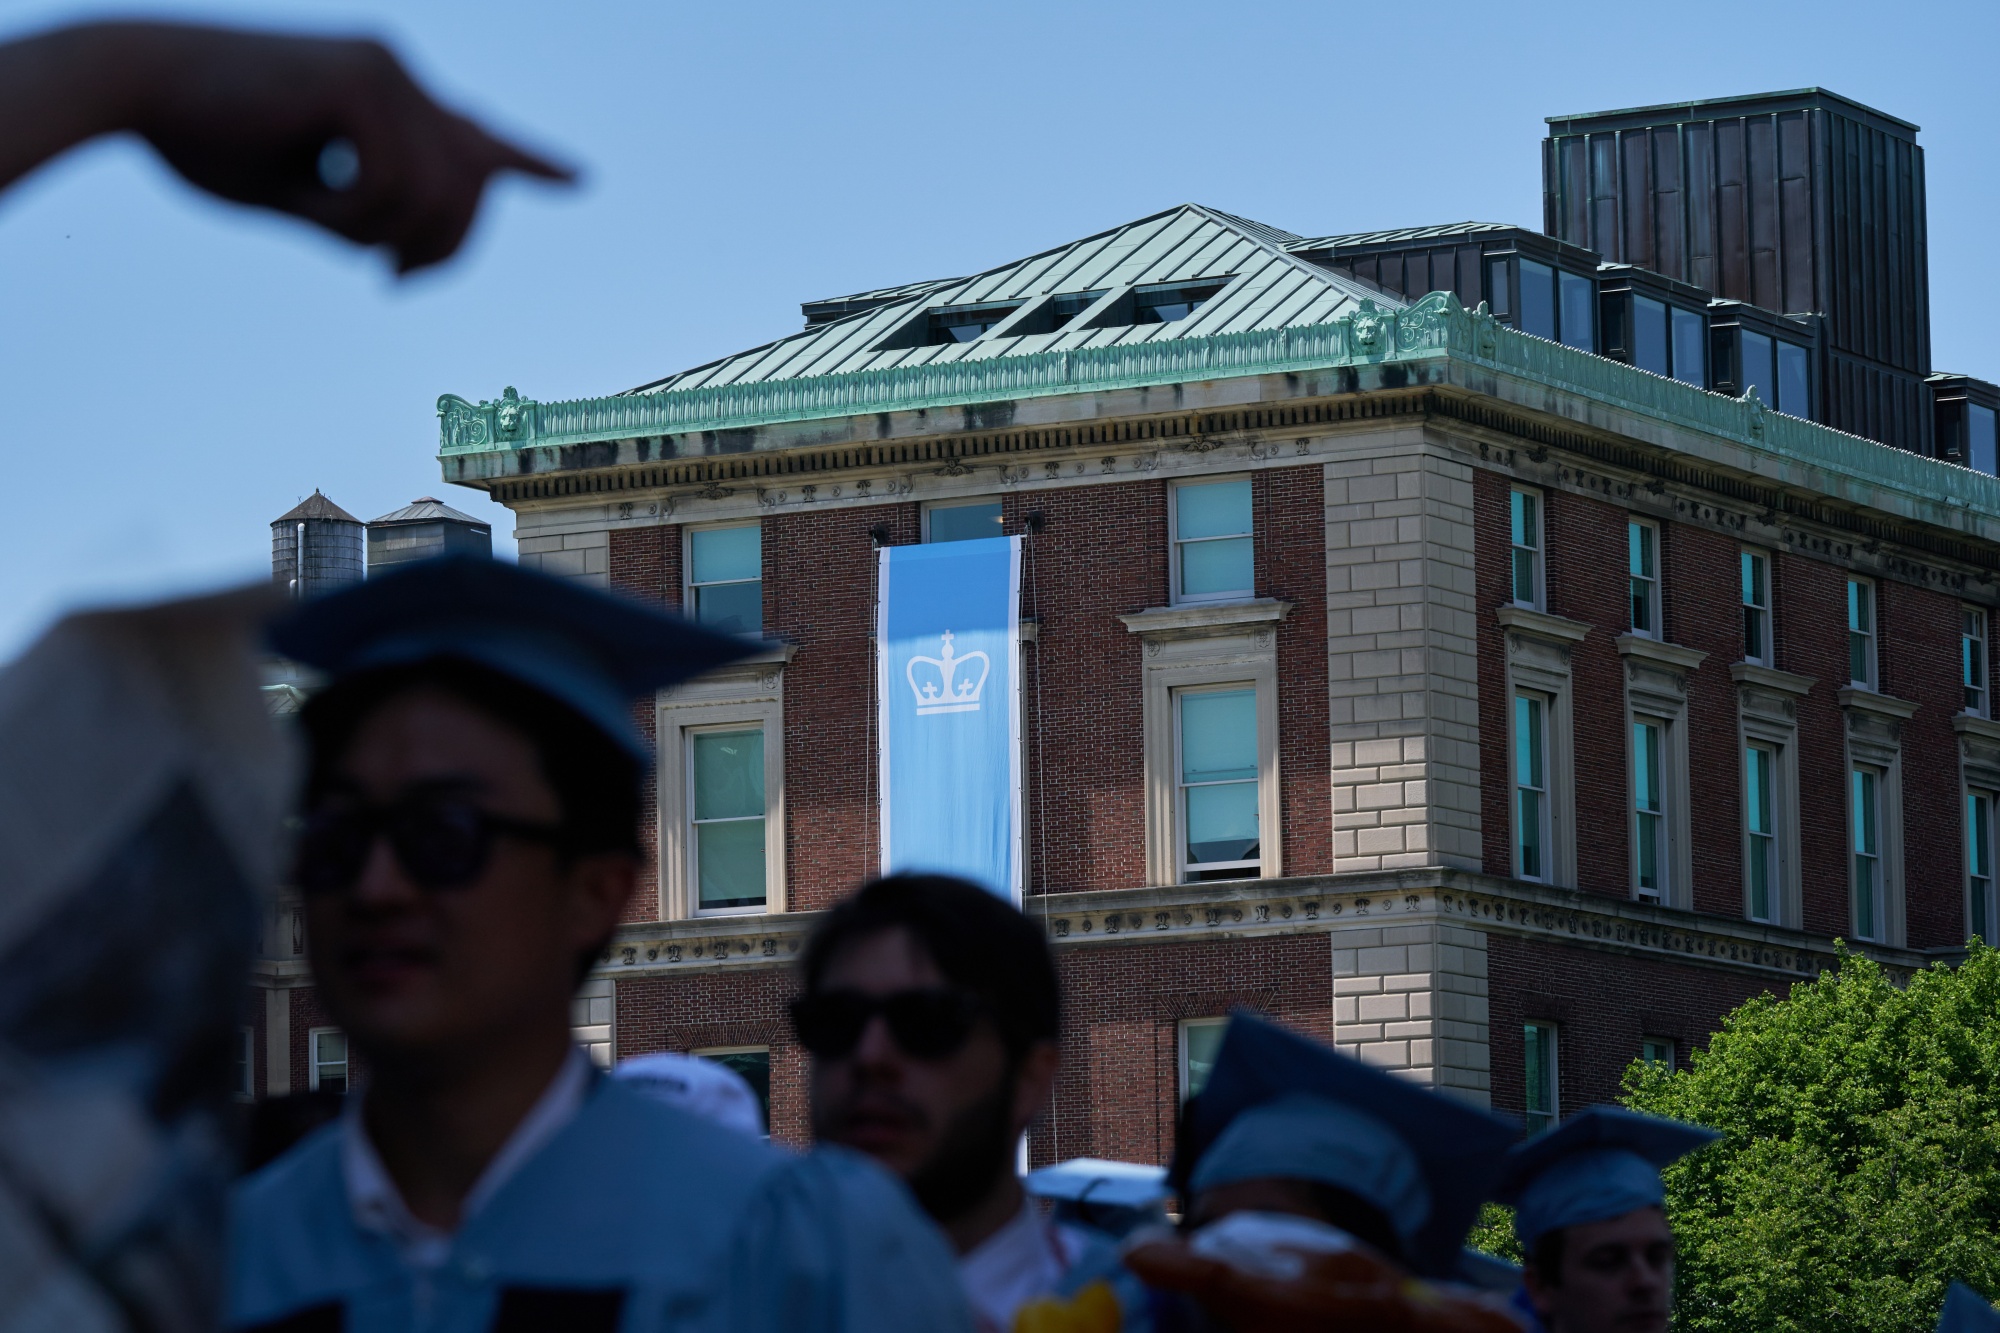 Columbia University Drops Out of U.S. News Rankings for